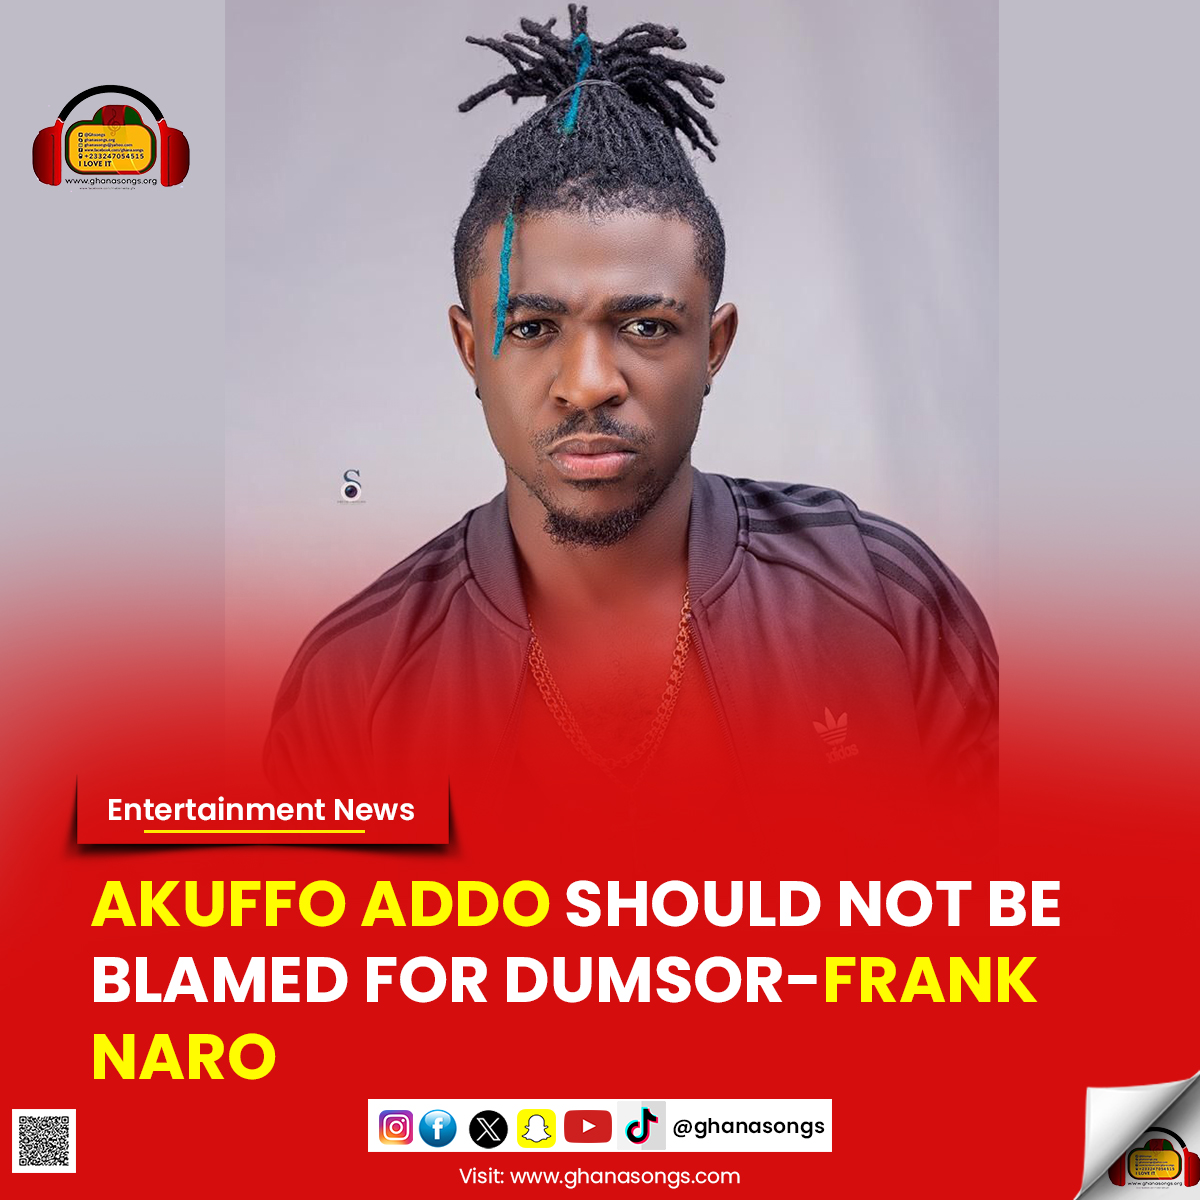 Akuffo Addo should not be blamed for “Dumsor” - Frank Naro